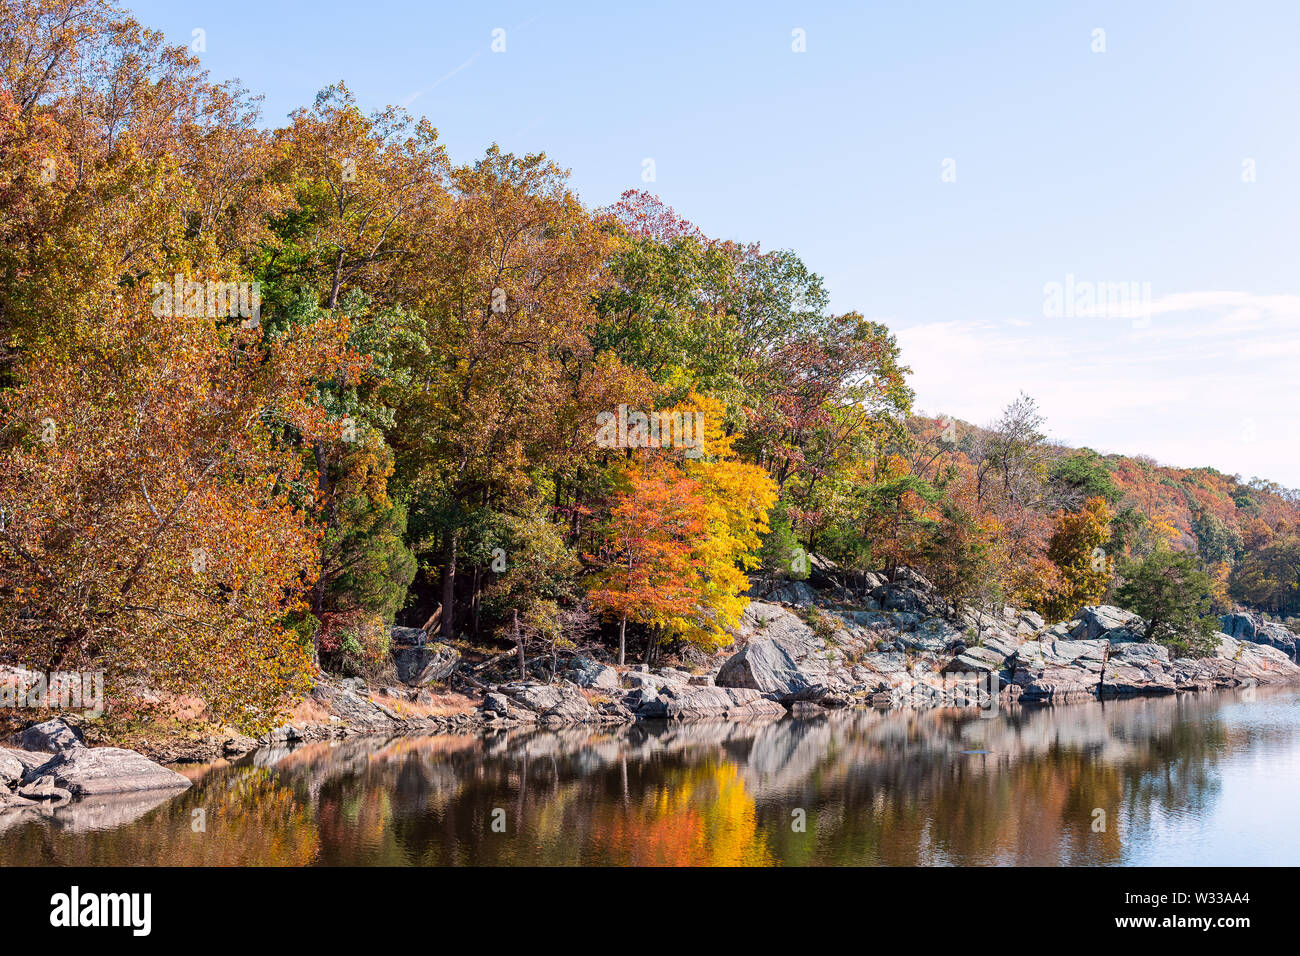 Great Falls yellow orange autumn tree reflection view in canal lake river surface during autumn in Maryland colorful leaves foliage Stock Photo